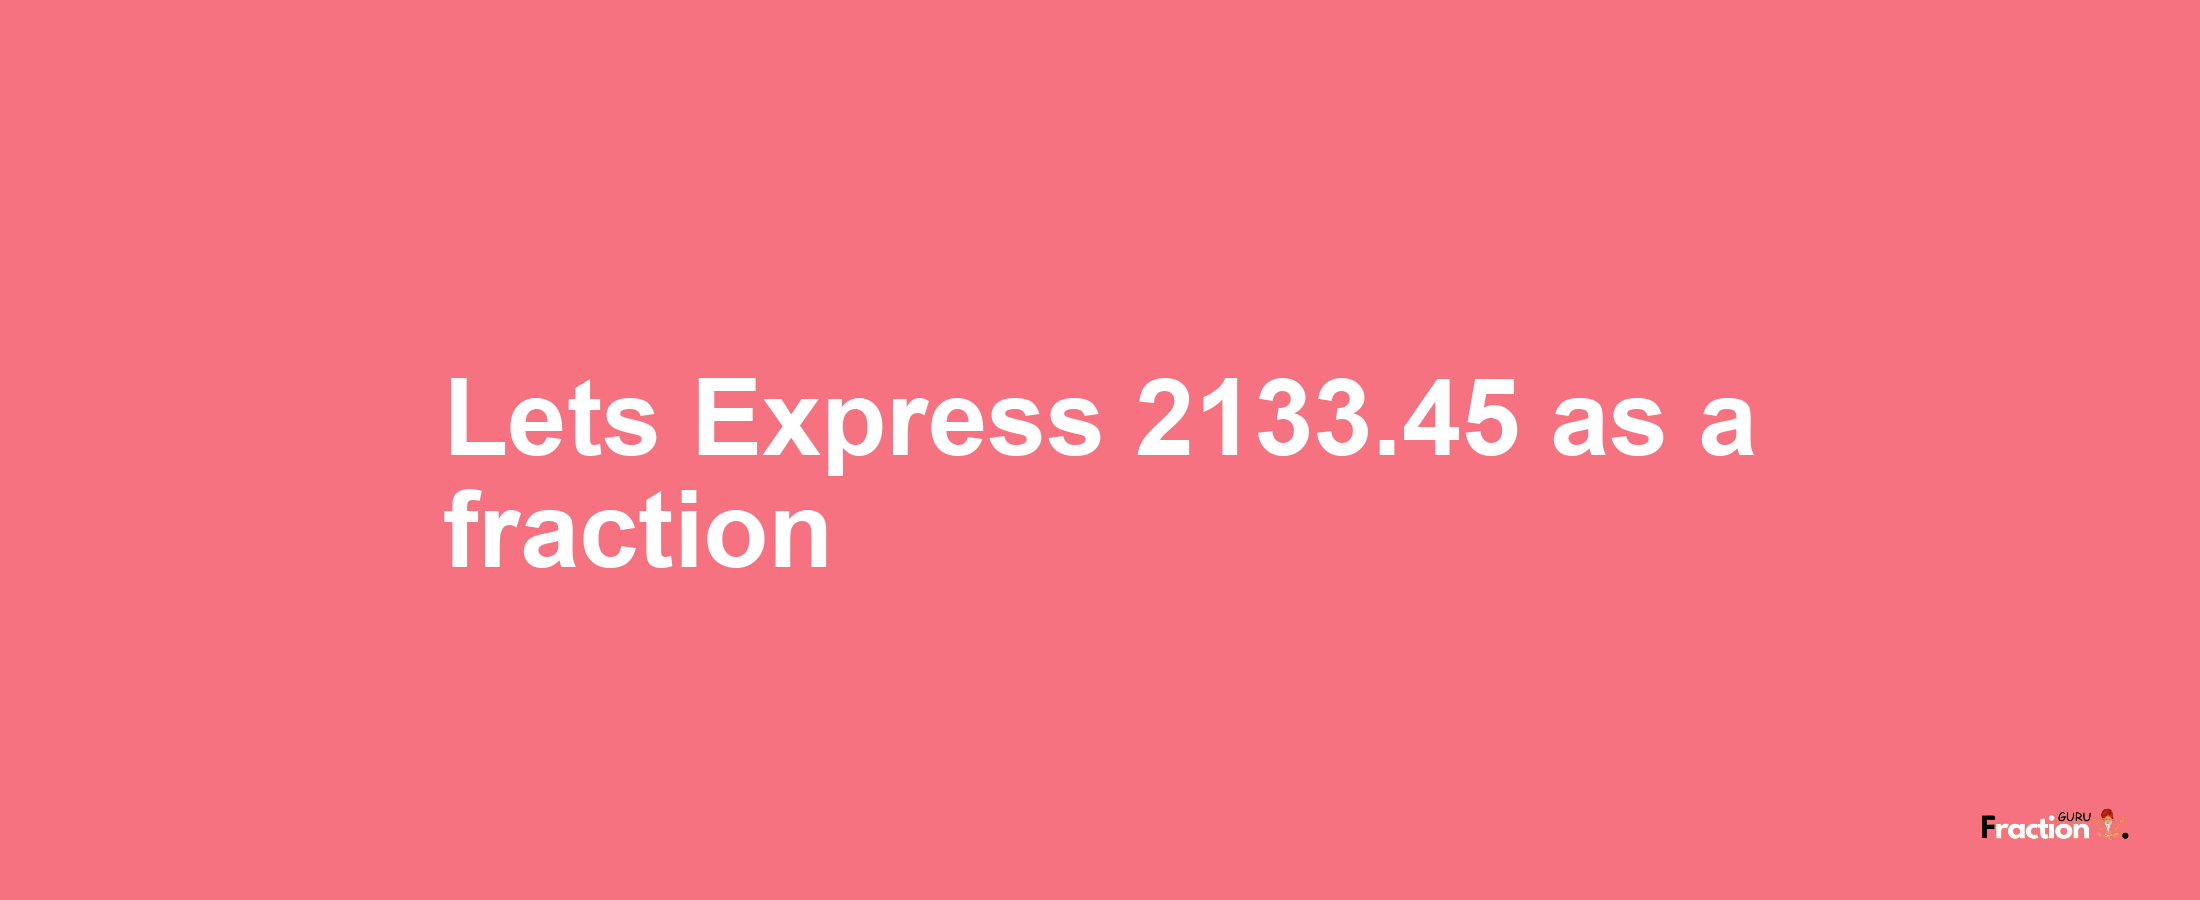 Lets Express 2133.45 as afraction